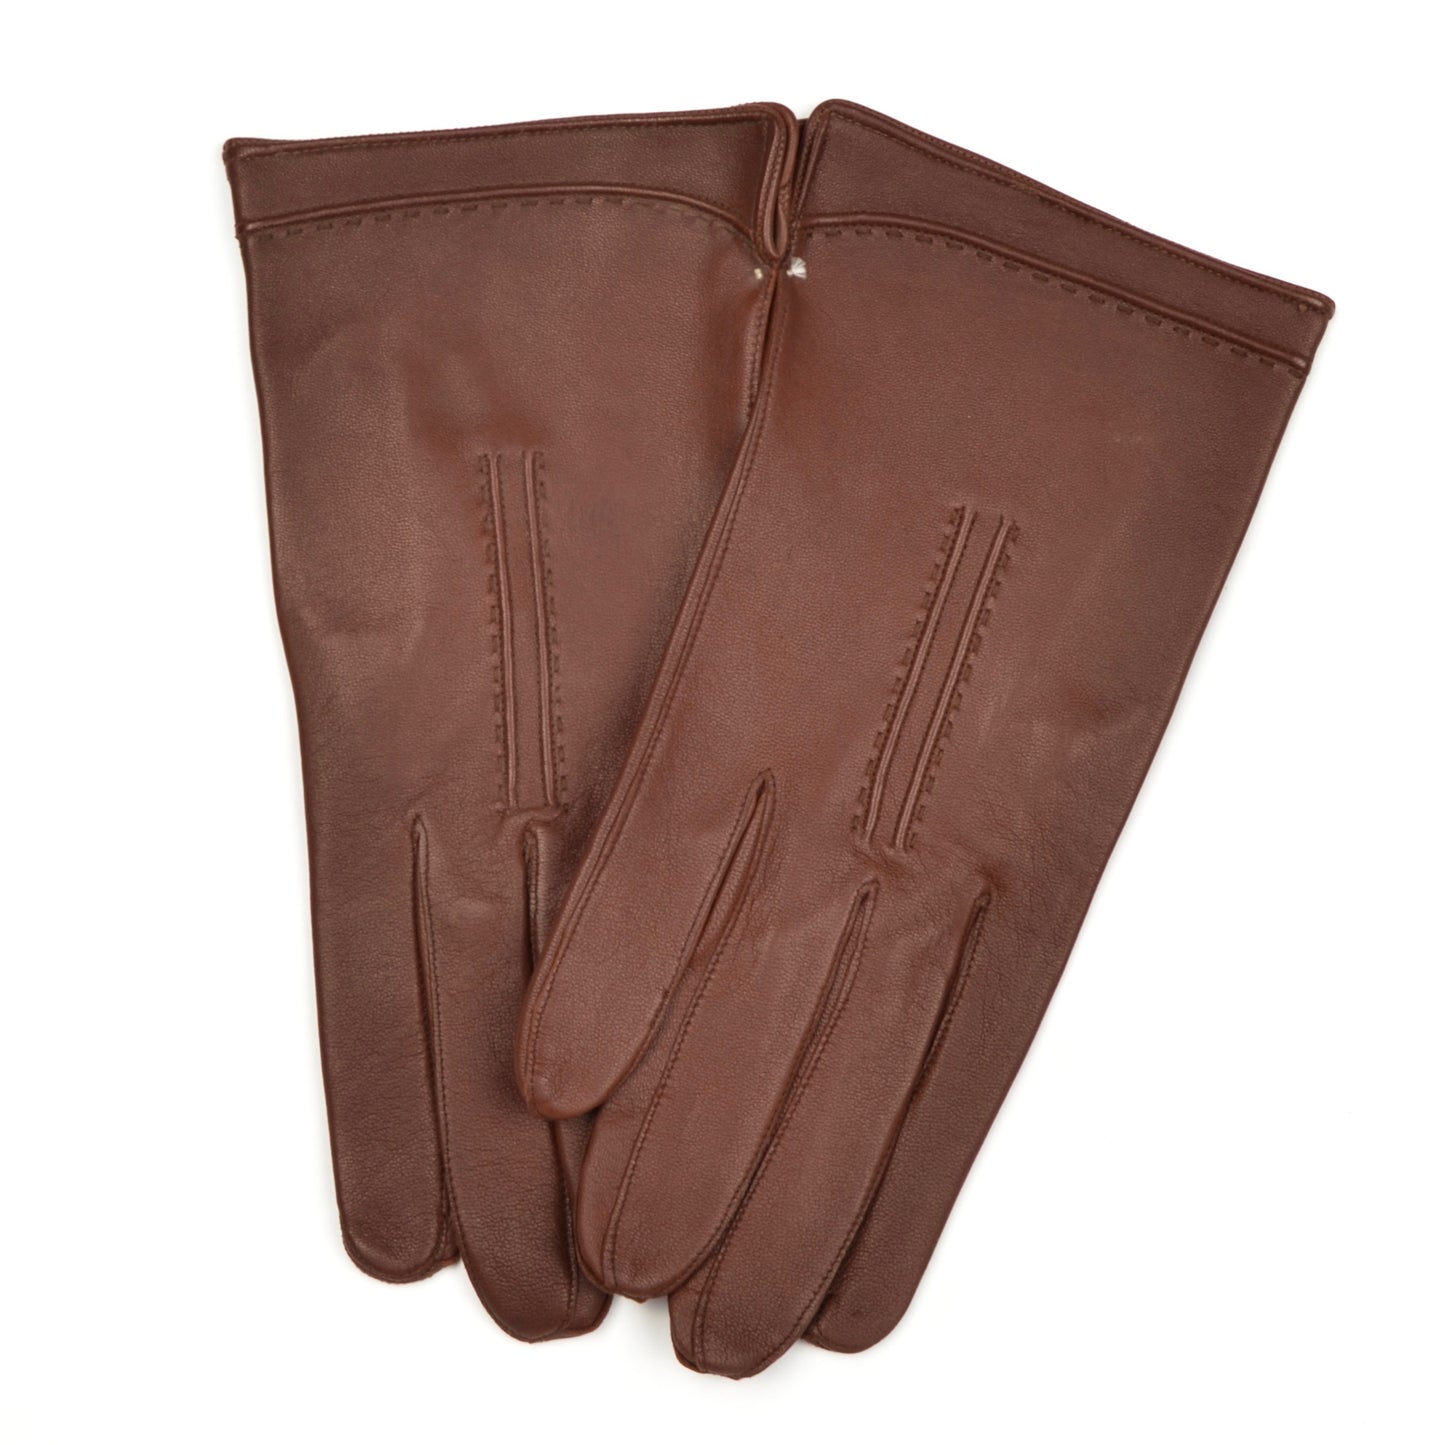 Unlined Calfskin Leather Dress Gloves Size 8 1/4 - Brown